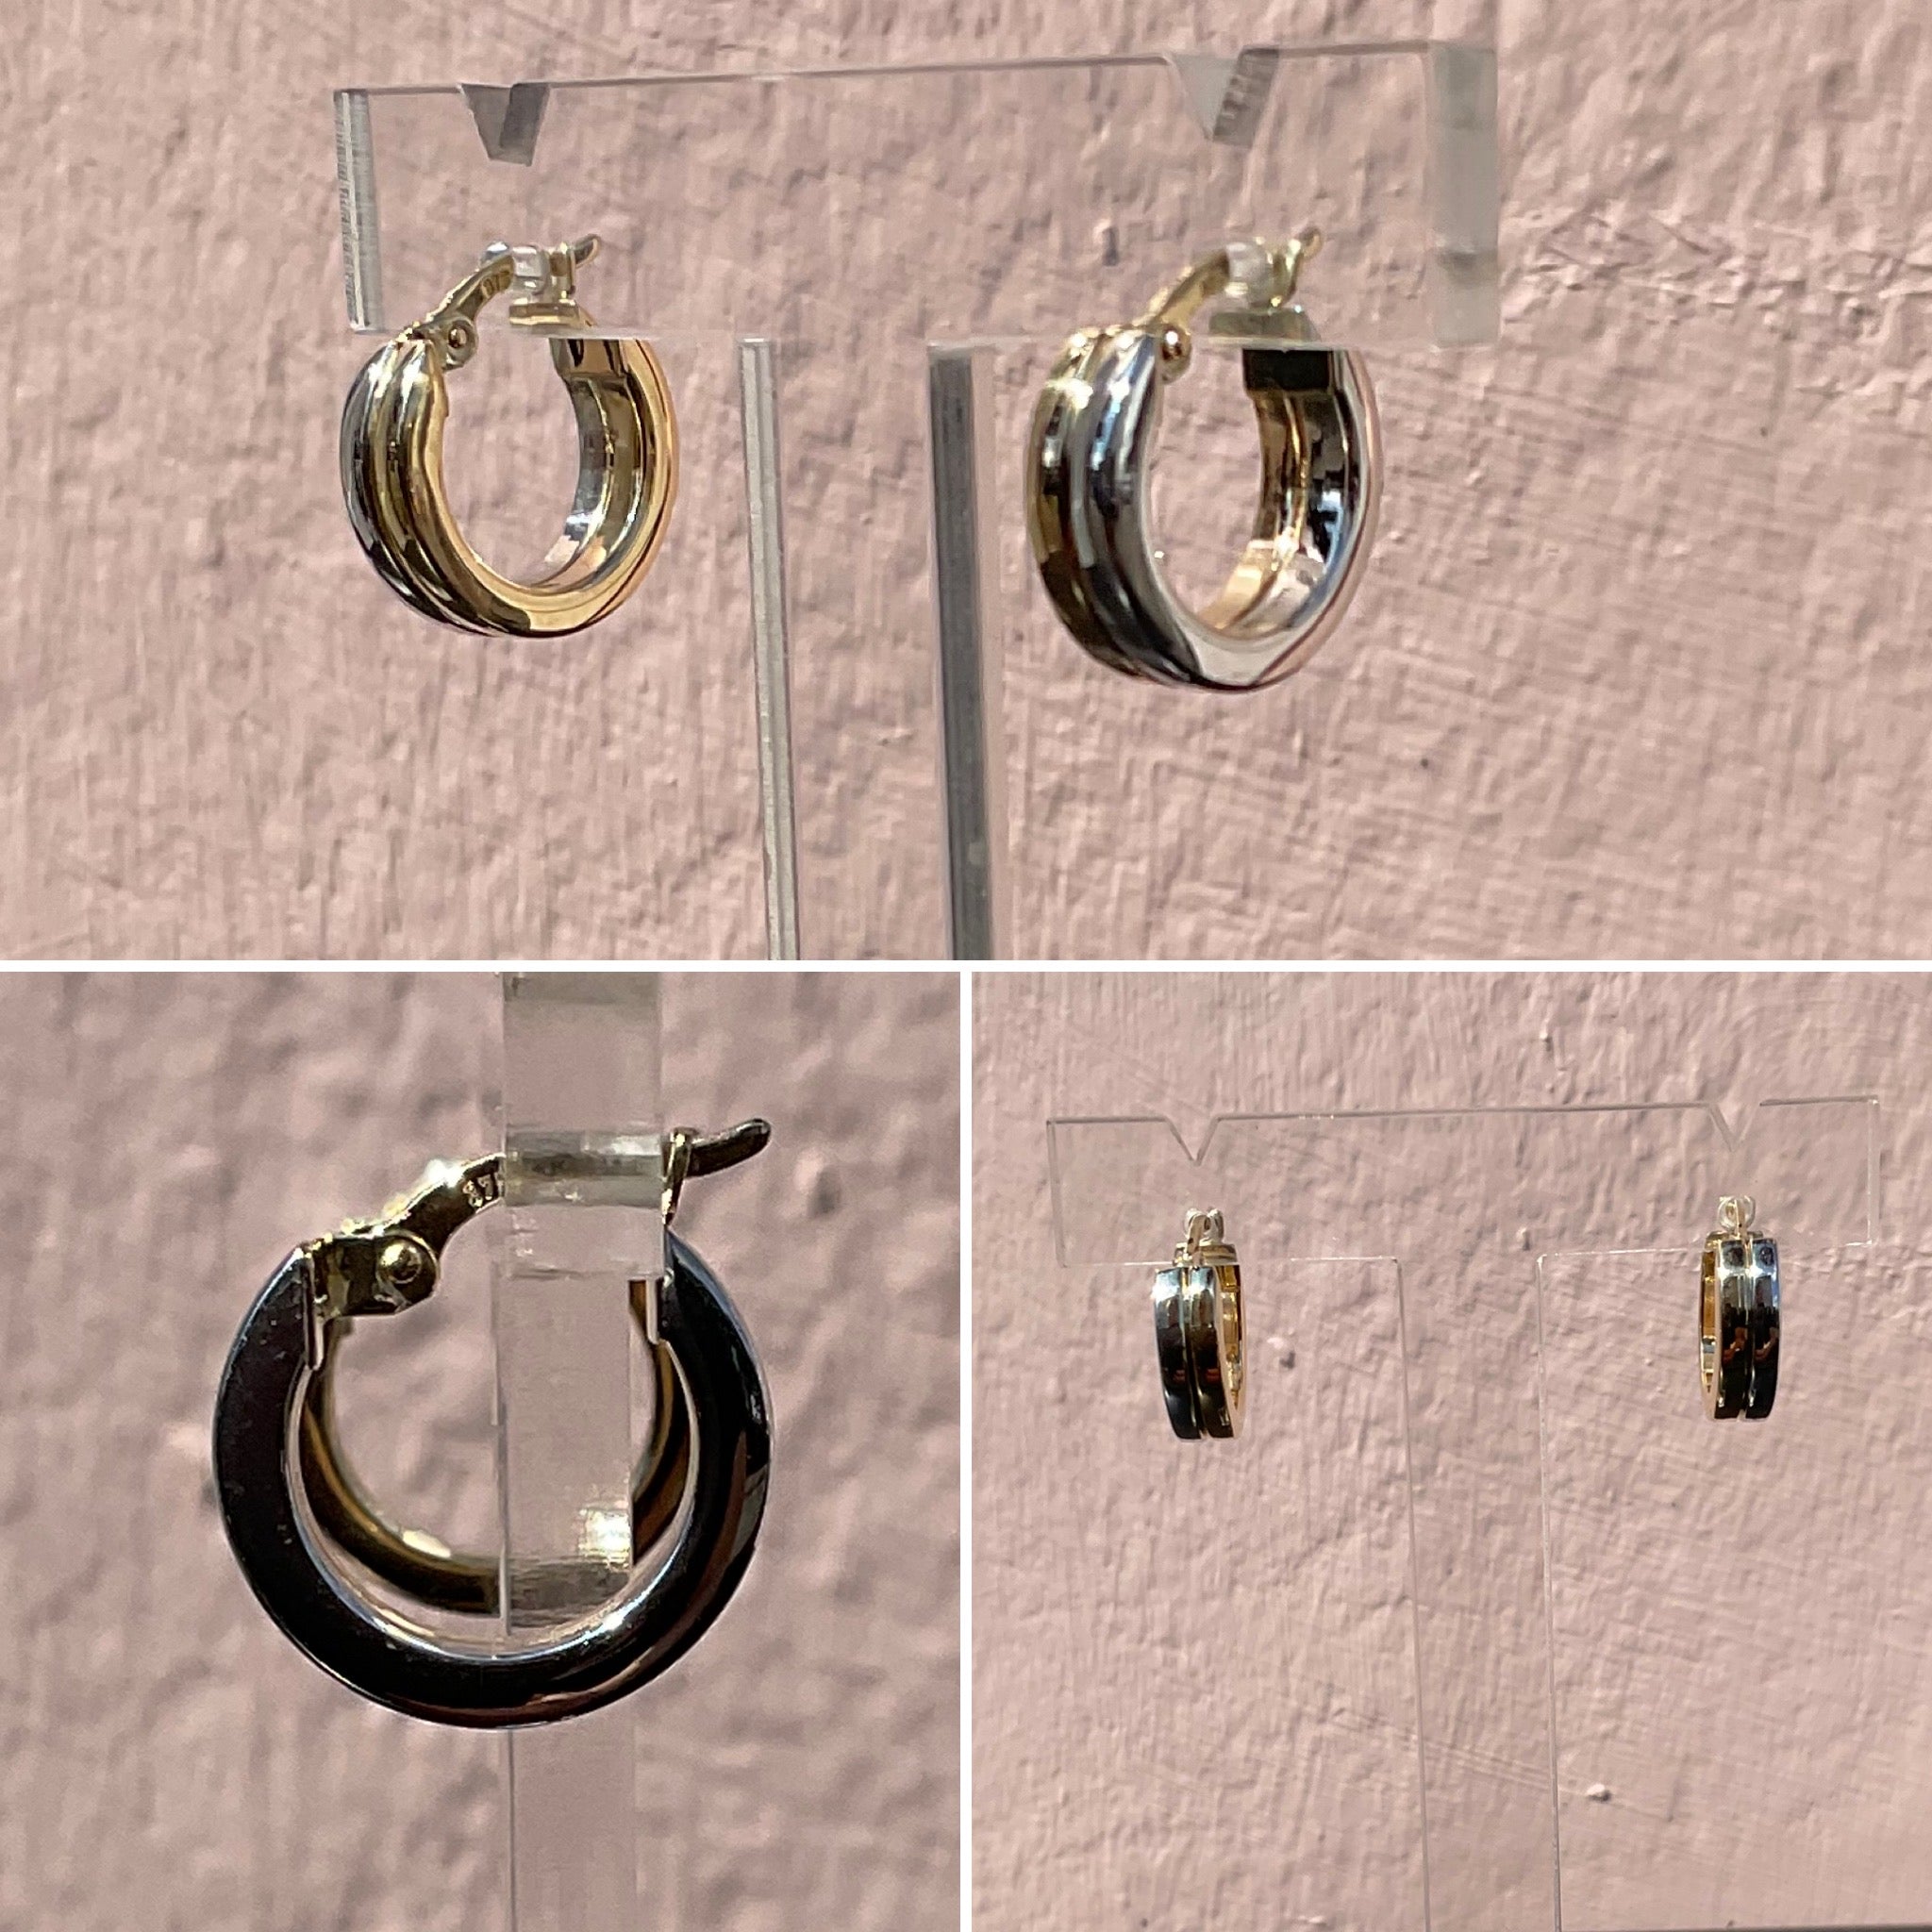 Yellow and White Gold 2 Row Small Round Hoop Earrings